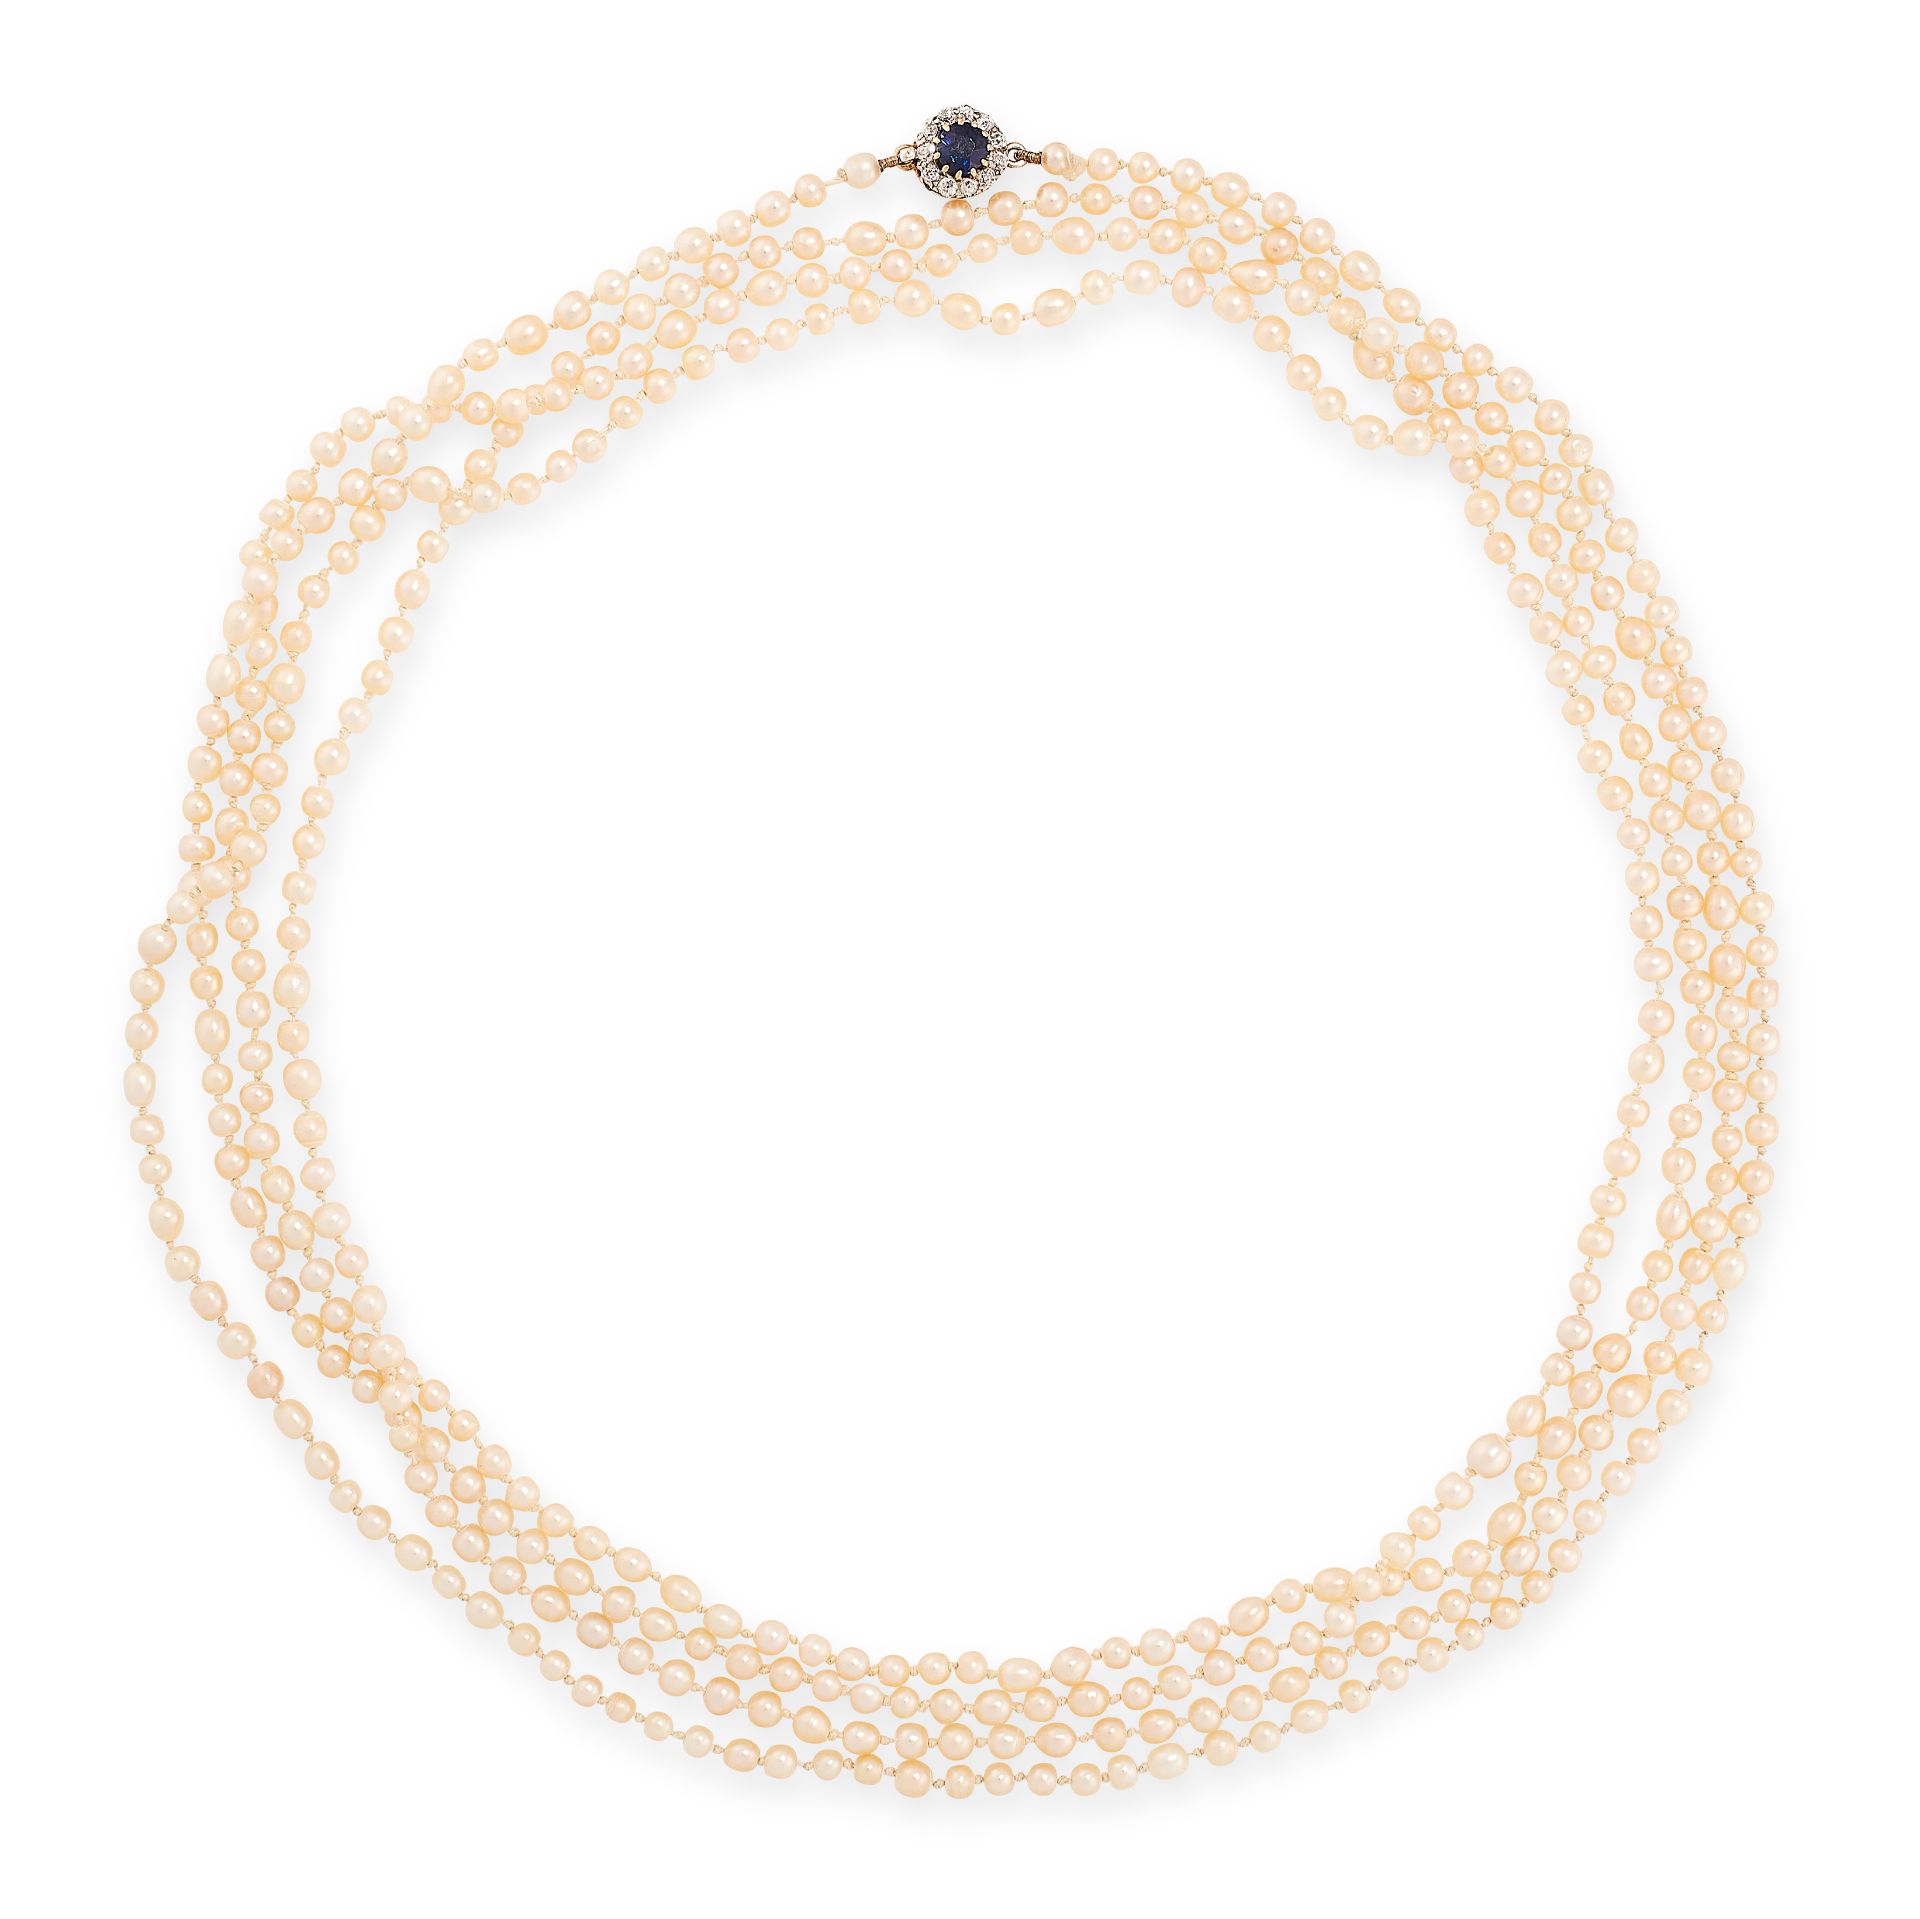 ANTIQUE NATURAL PEARL, SAPPHIRE AND DIAMOND SAUTOIR NECKLACE comprising a single row of four hundred